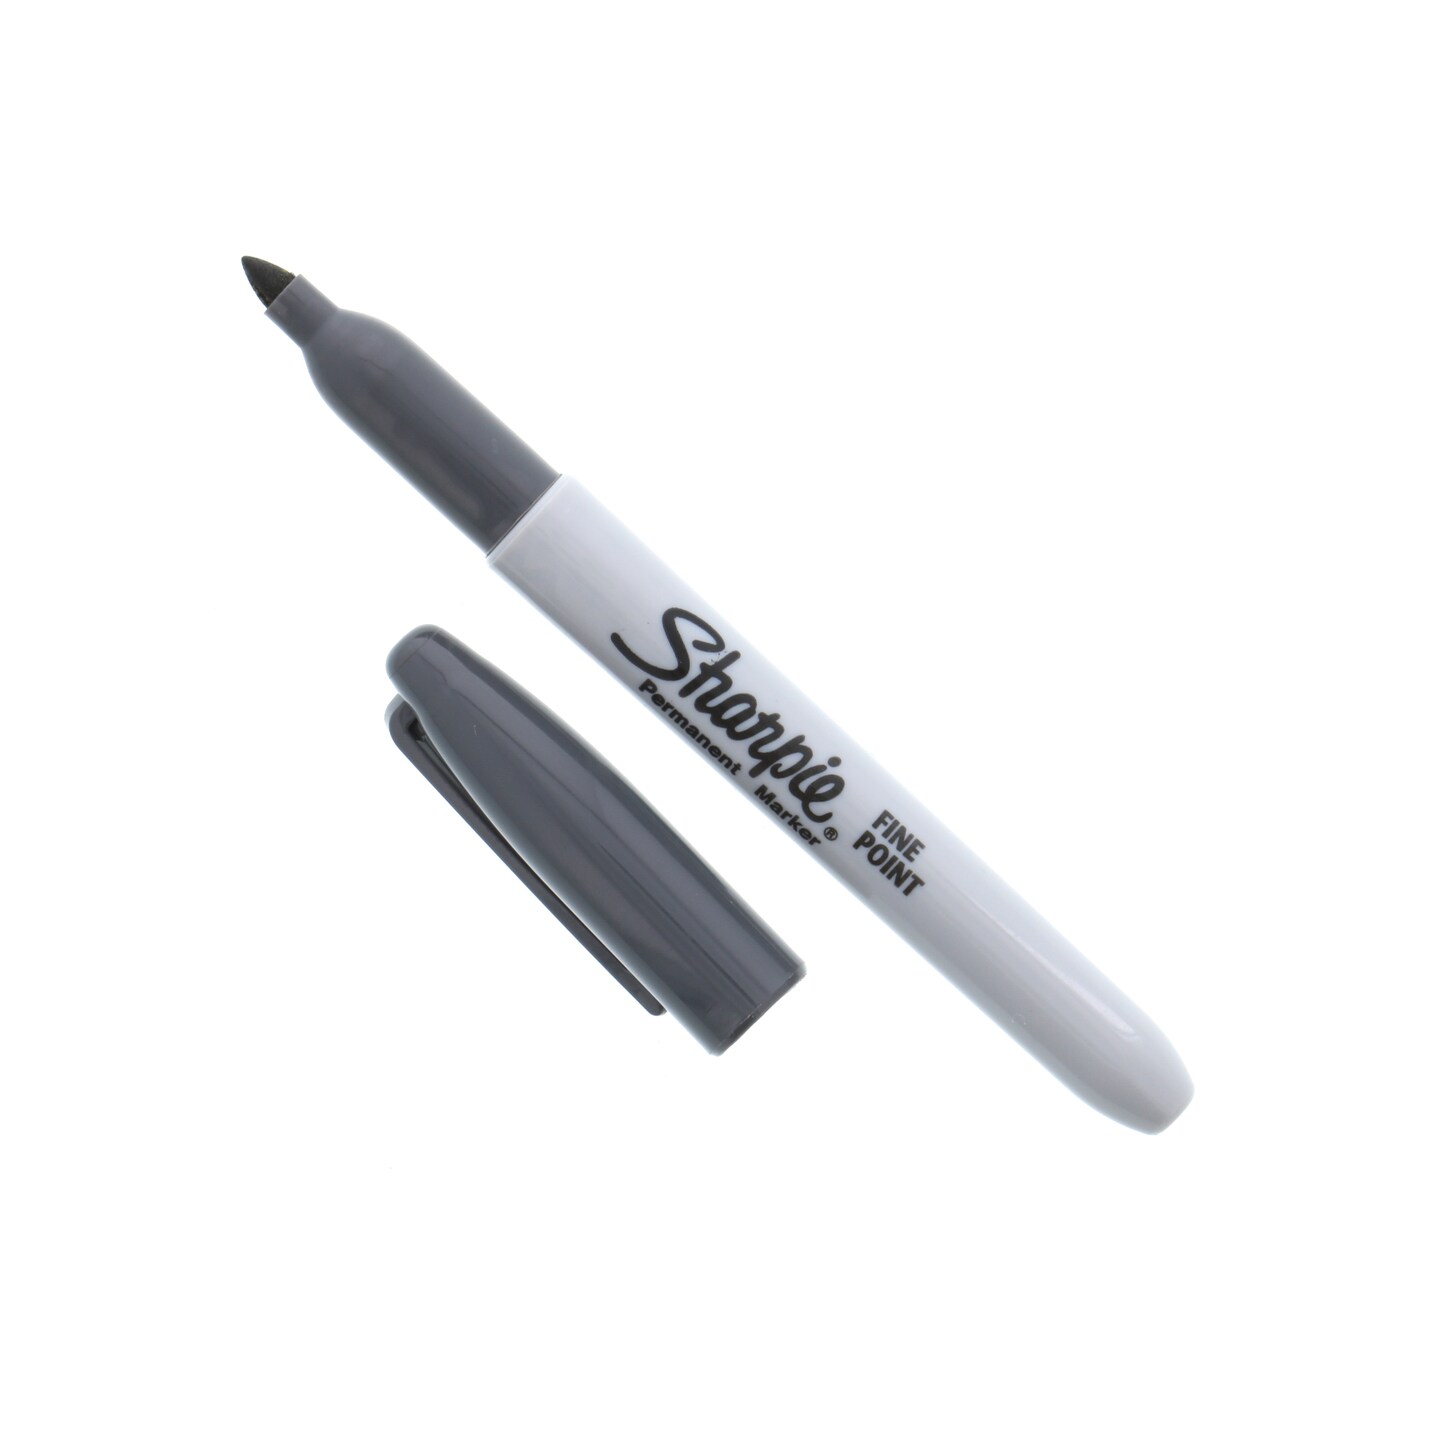 SHARPIE - Fine Upc Slate Grey, Style Name Classic, Pack of 1 (1768783)